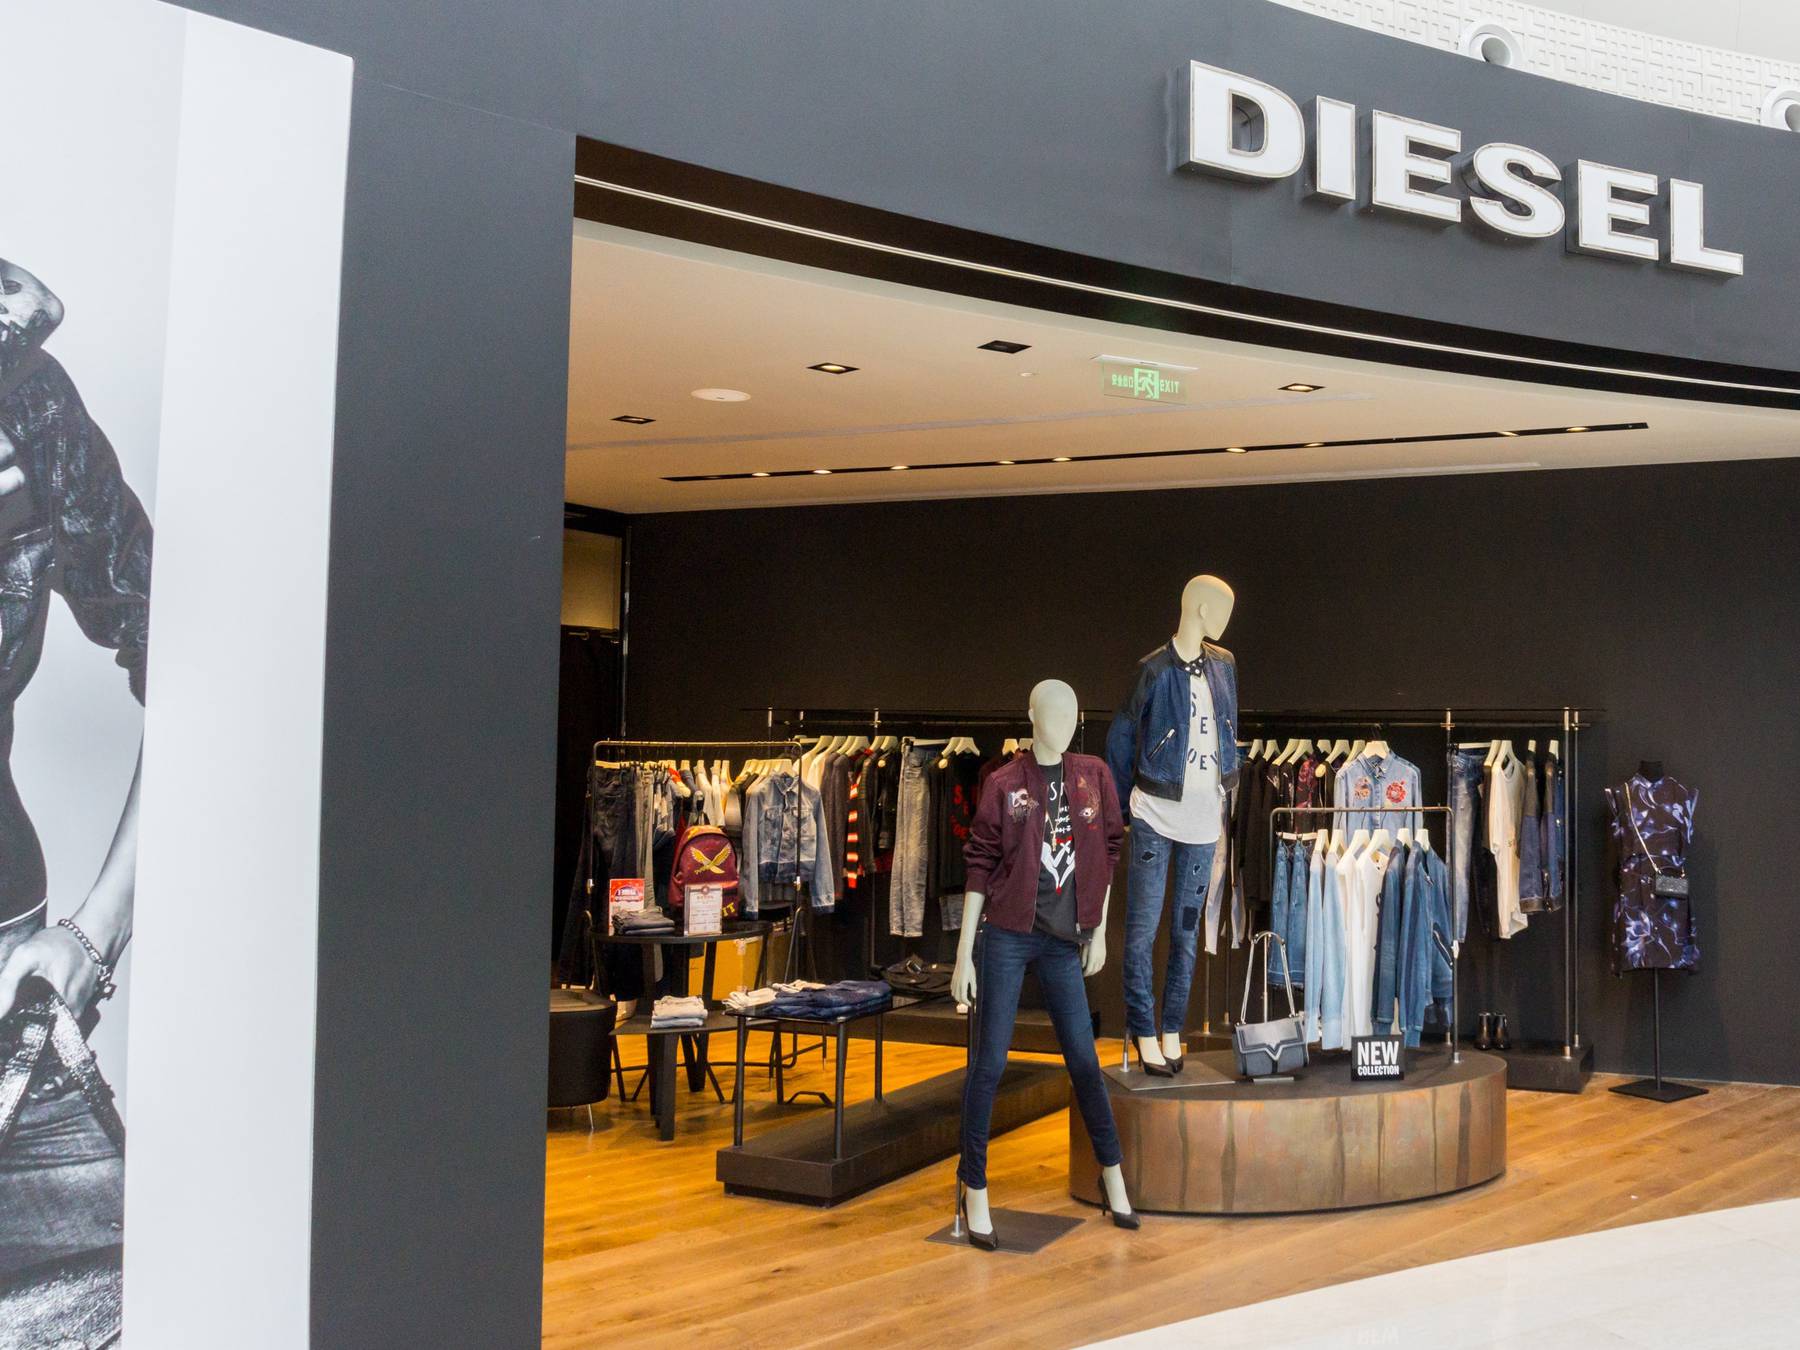 Diesel Clothes Turkey: A Comprehensive Guide to Diesel Products ...